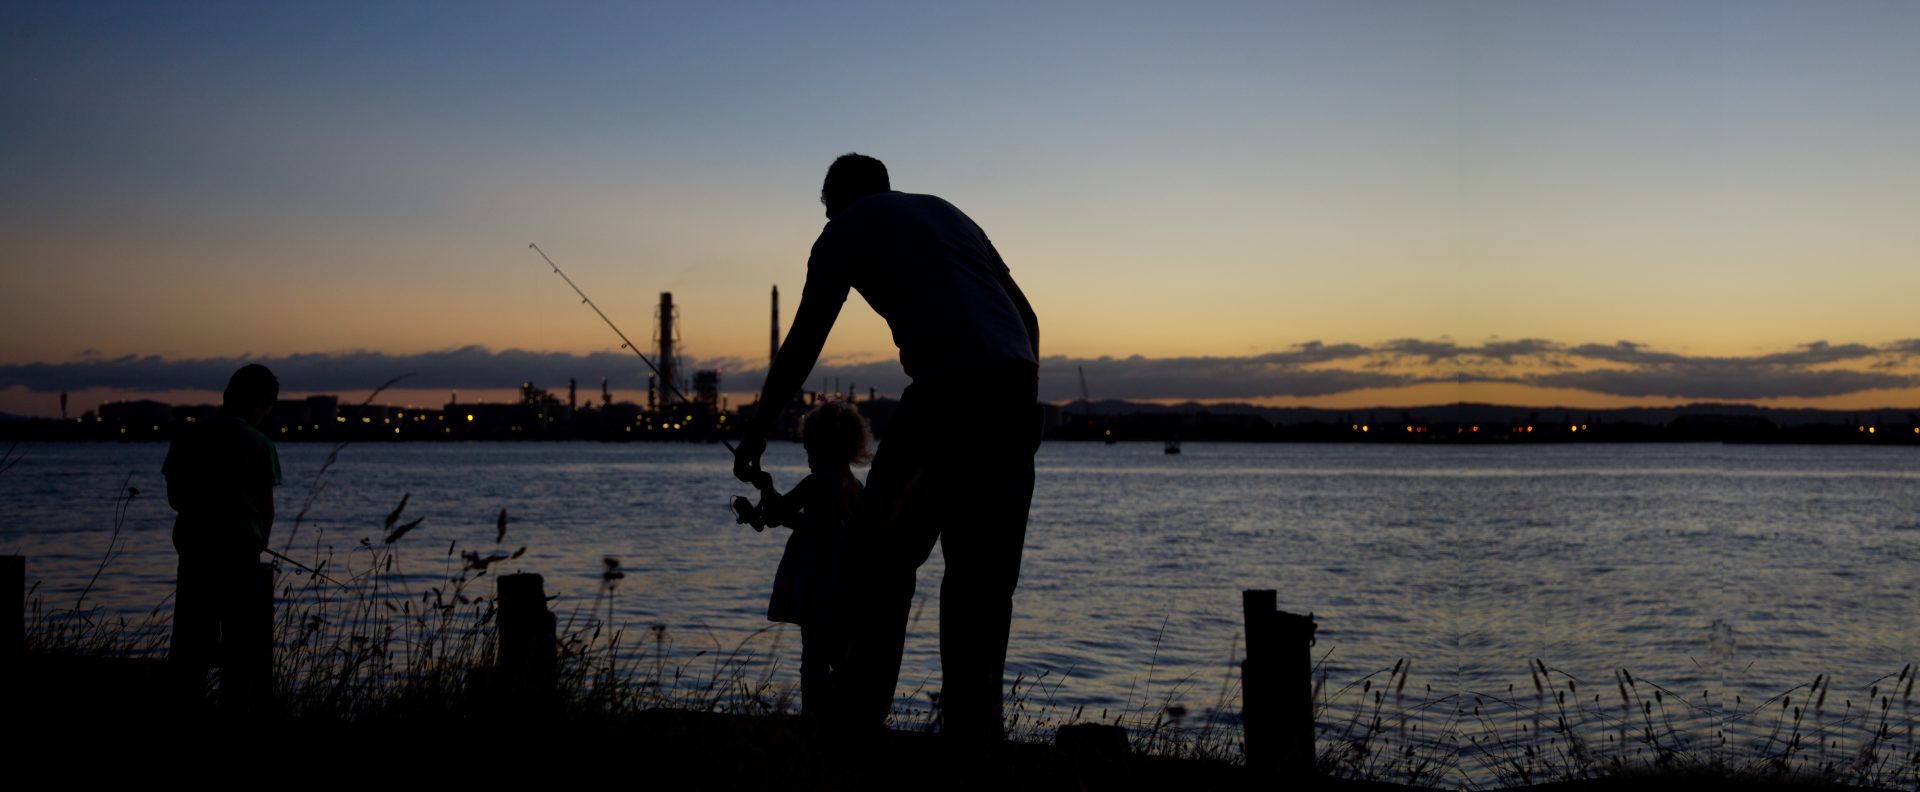 Father & Son fishing at sunset